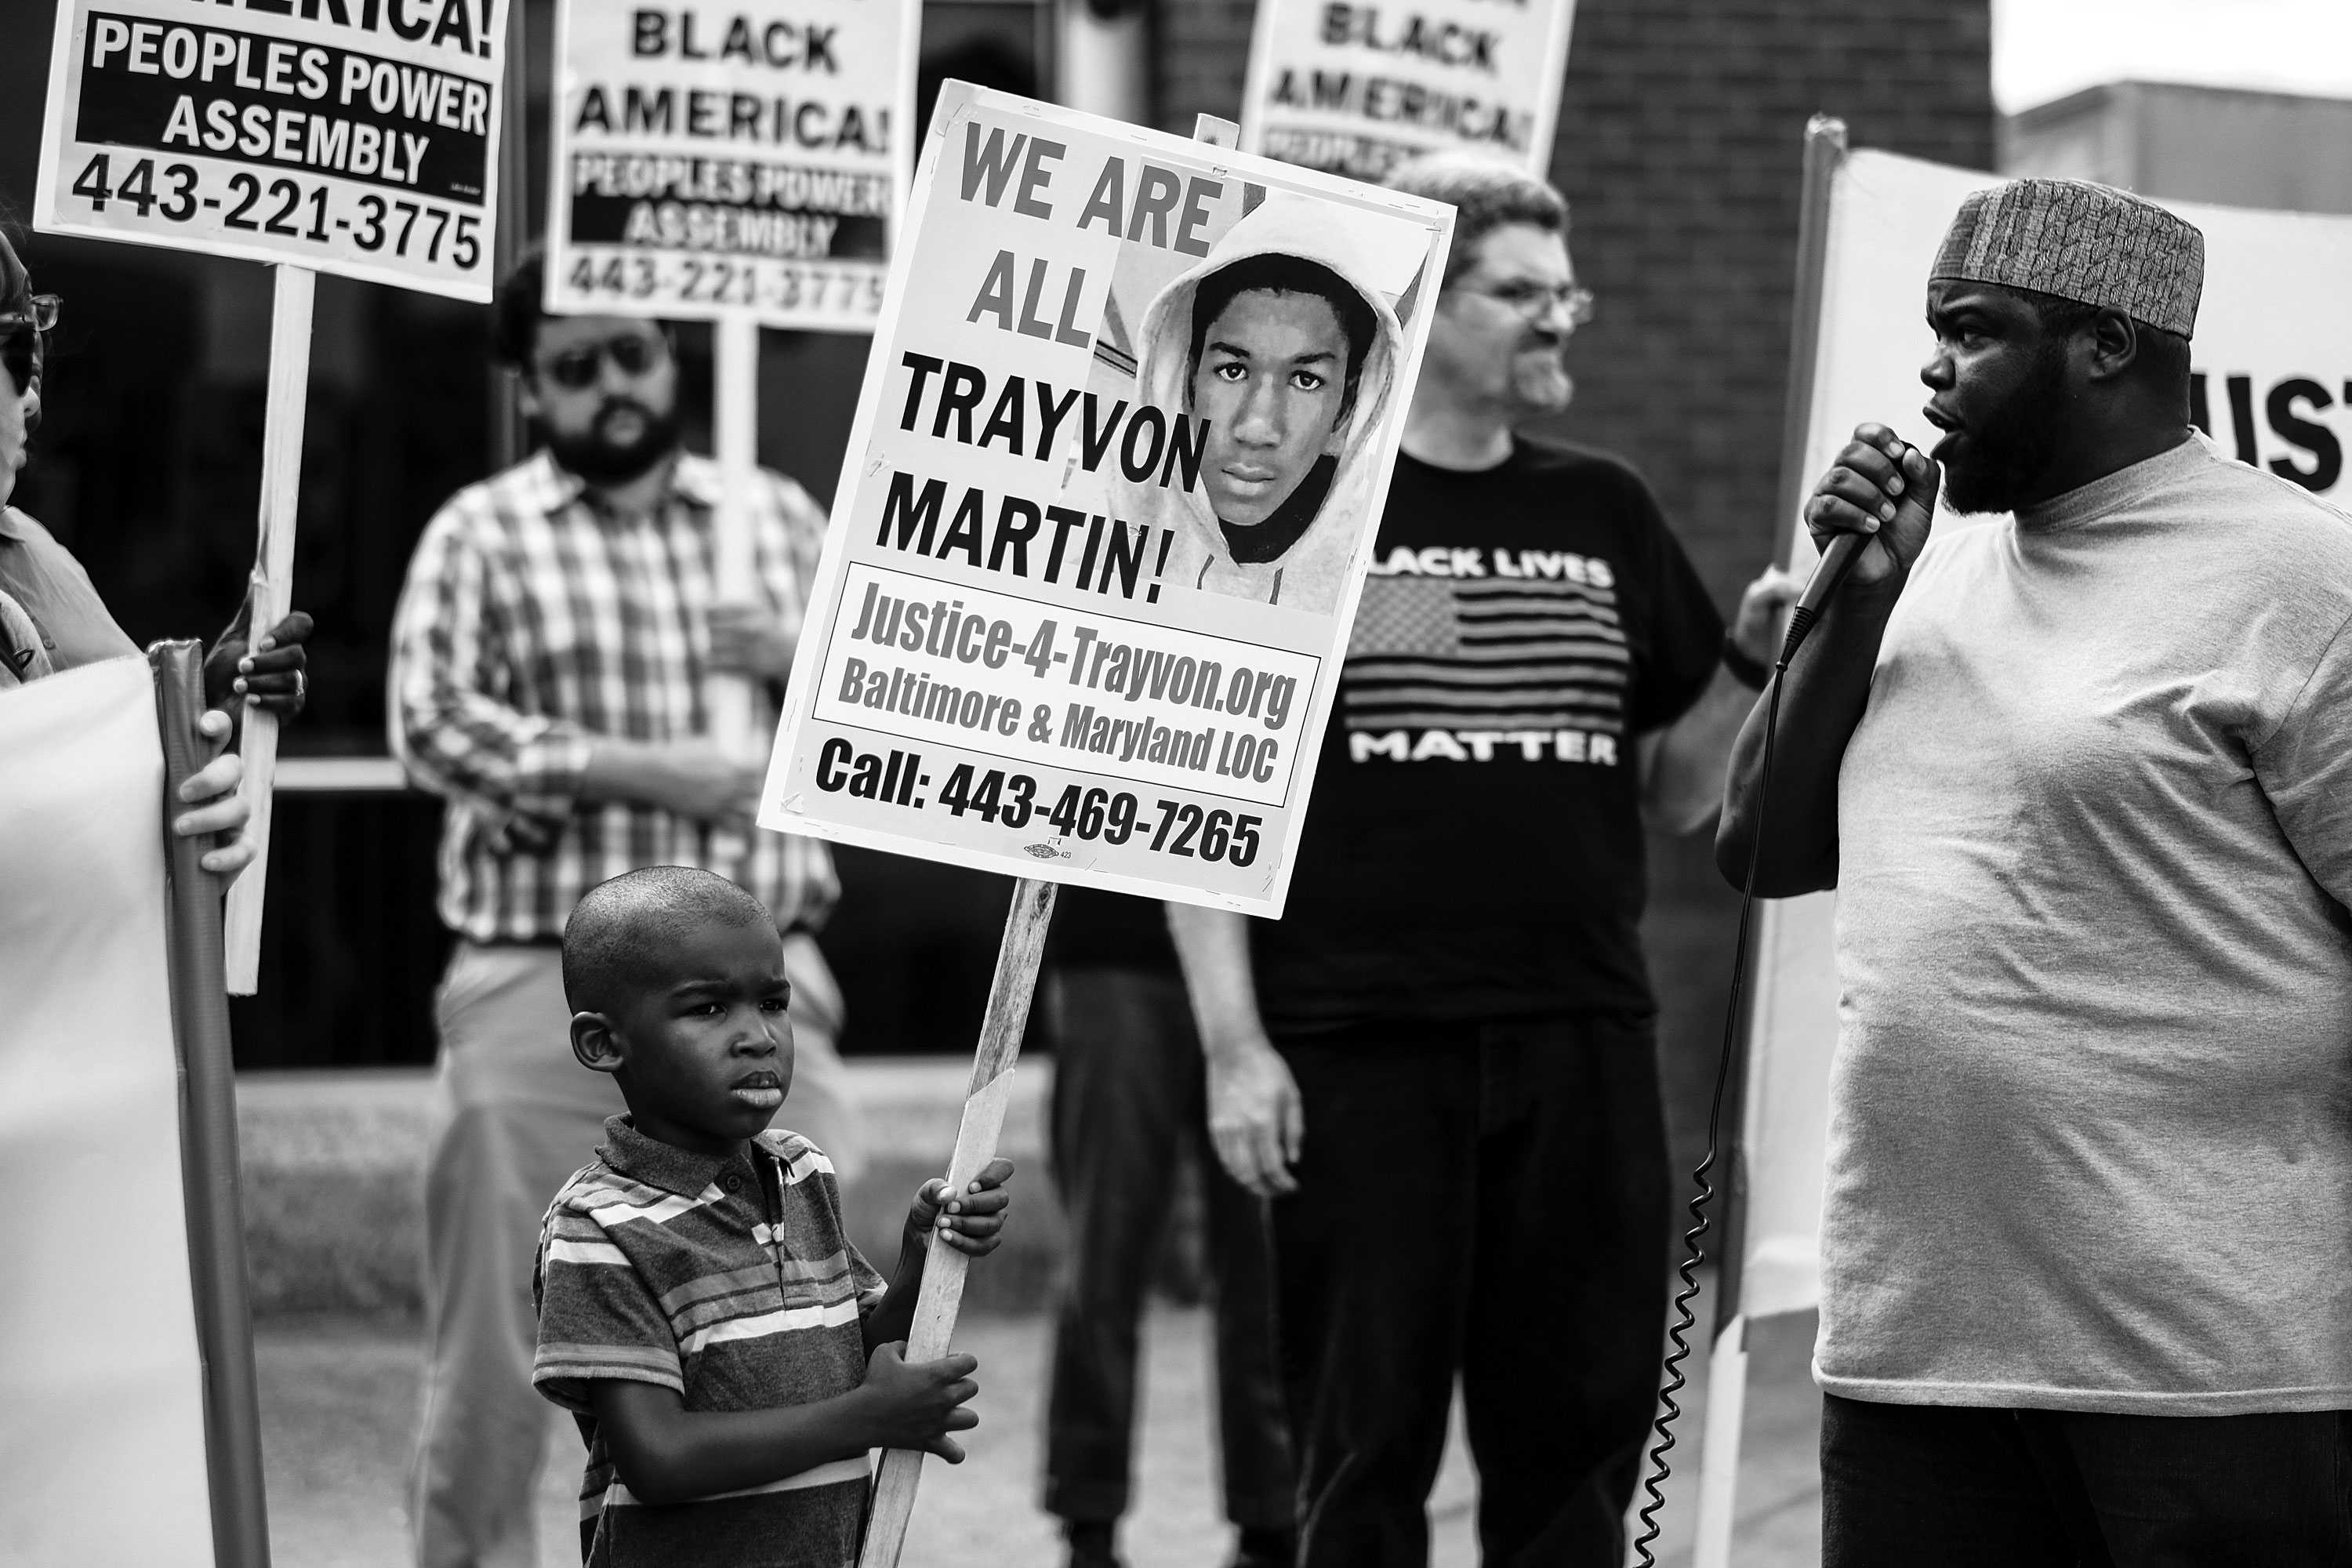 A young boy, probably around 5 years old, is holding a Trayvon Martin picking sign among a crowd of protestors.